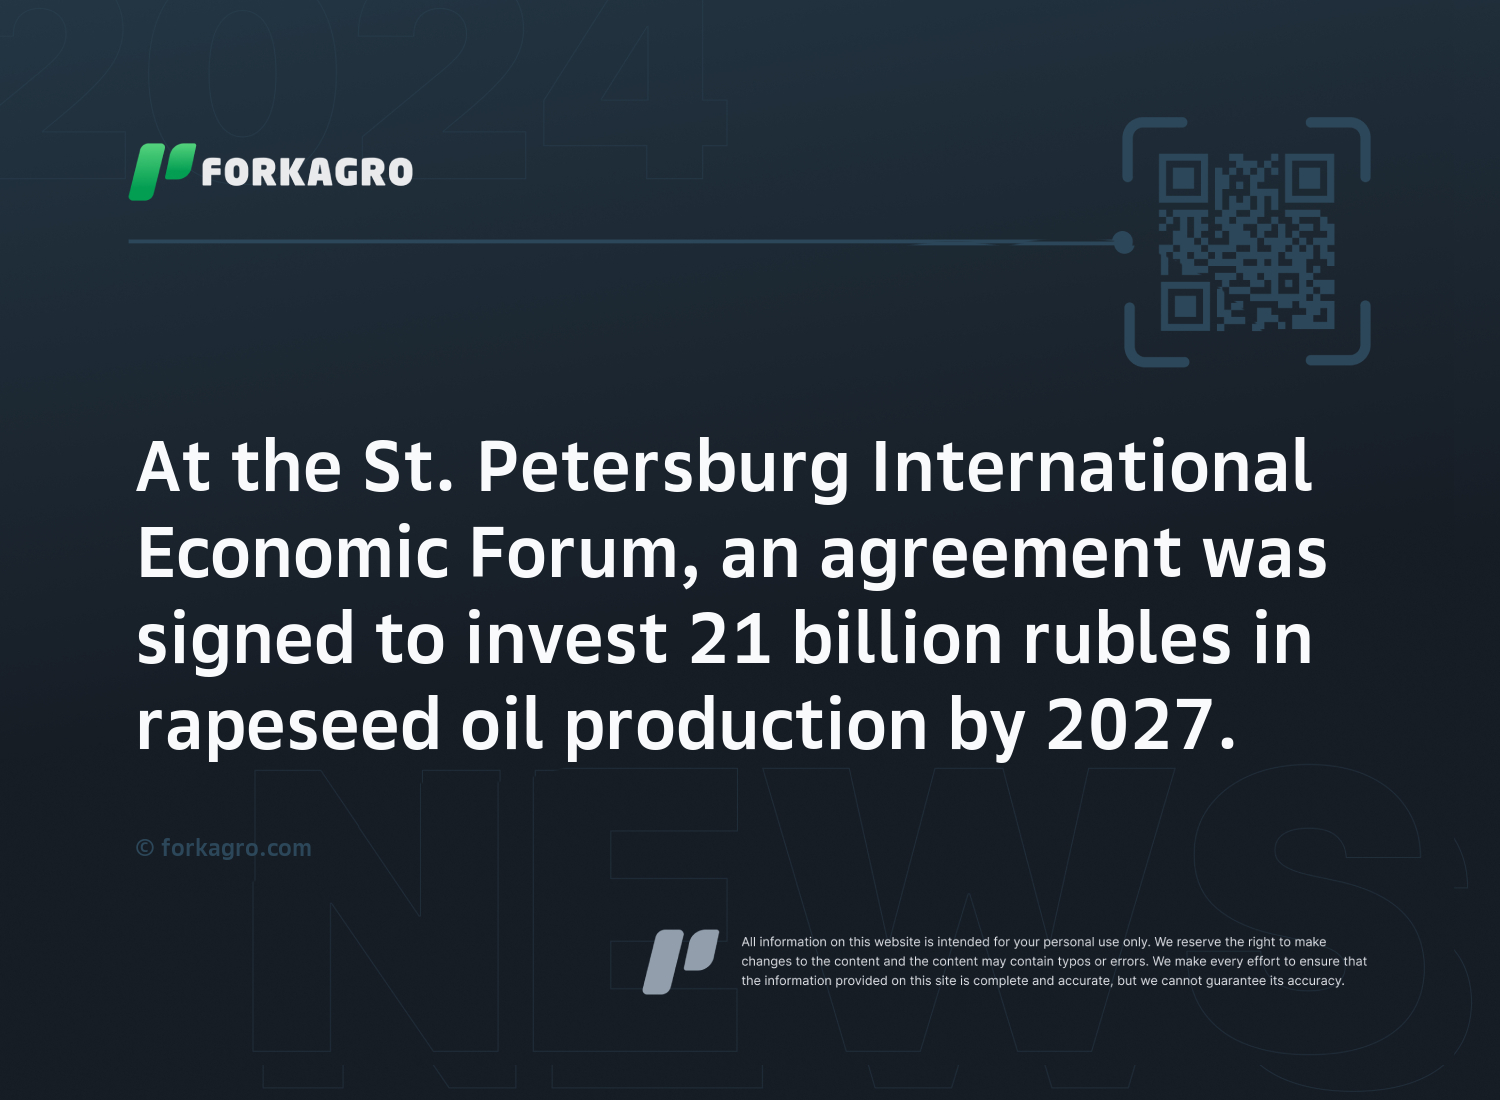 At the St. Petersburg International Economic Forum, an agreement was signed to invest 21 billion rubles in rapeseed oil production by 2027.